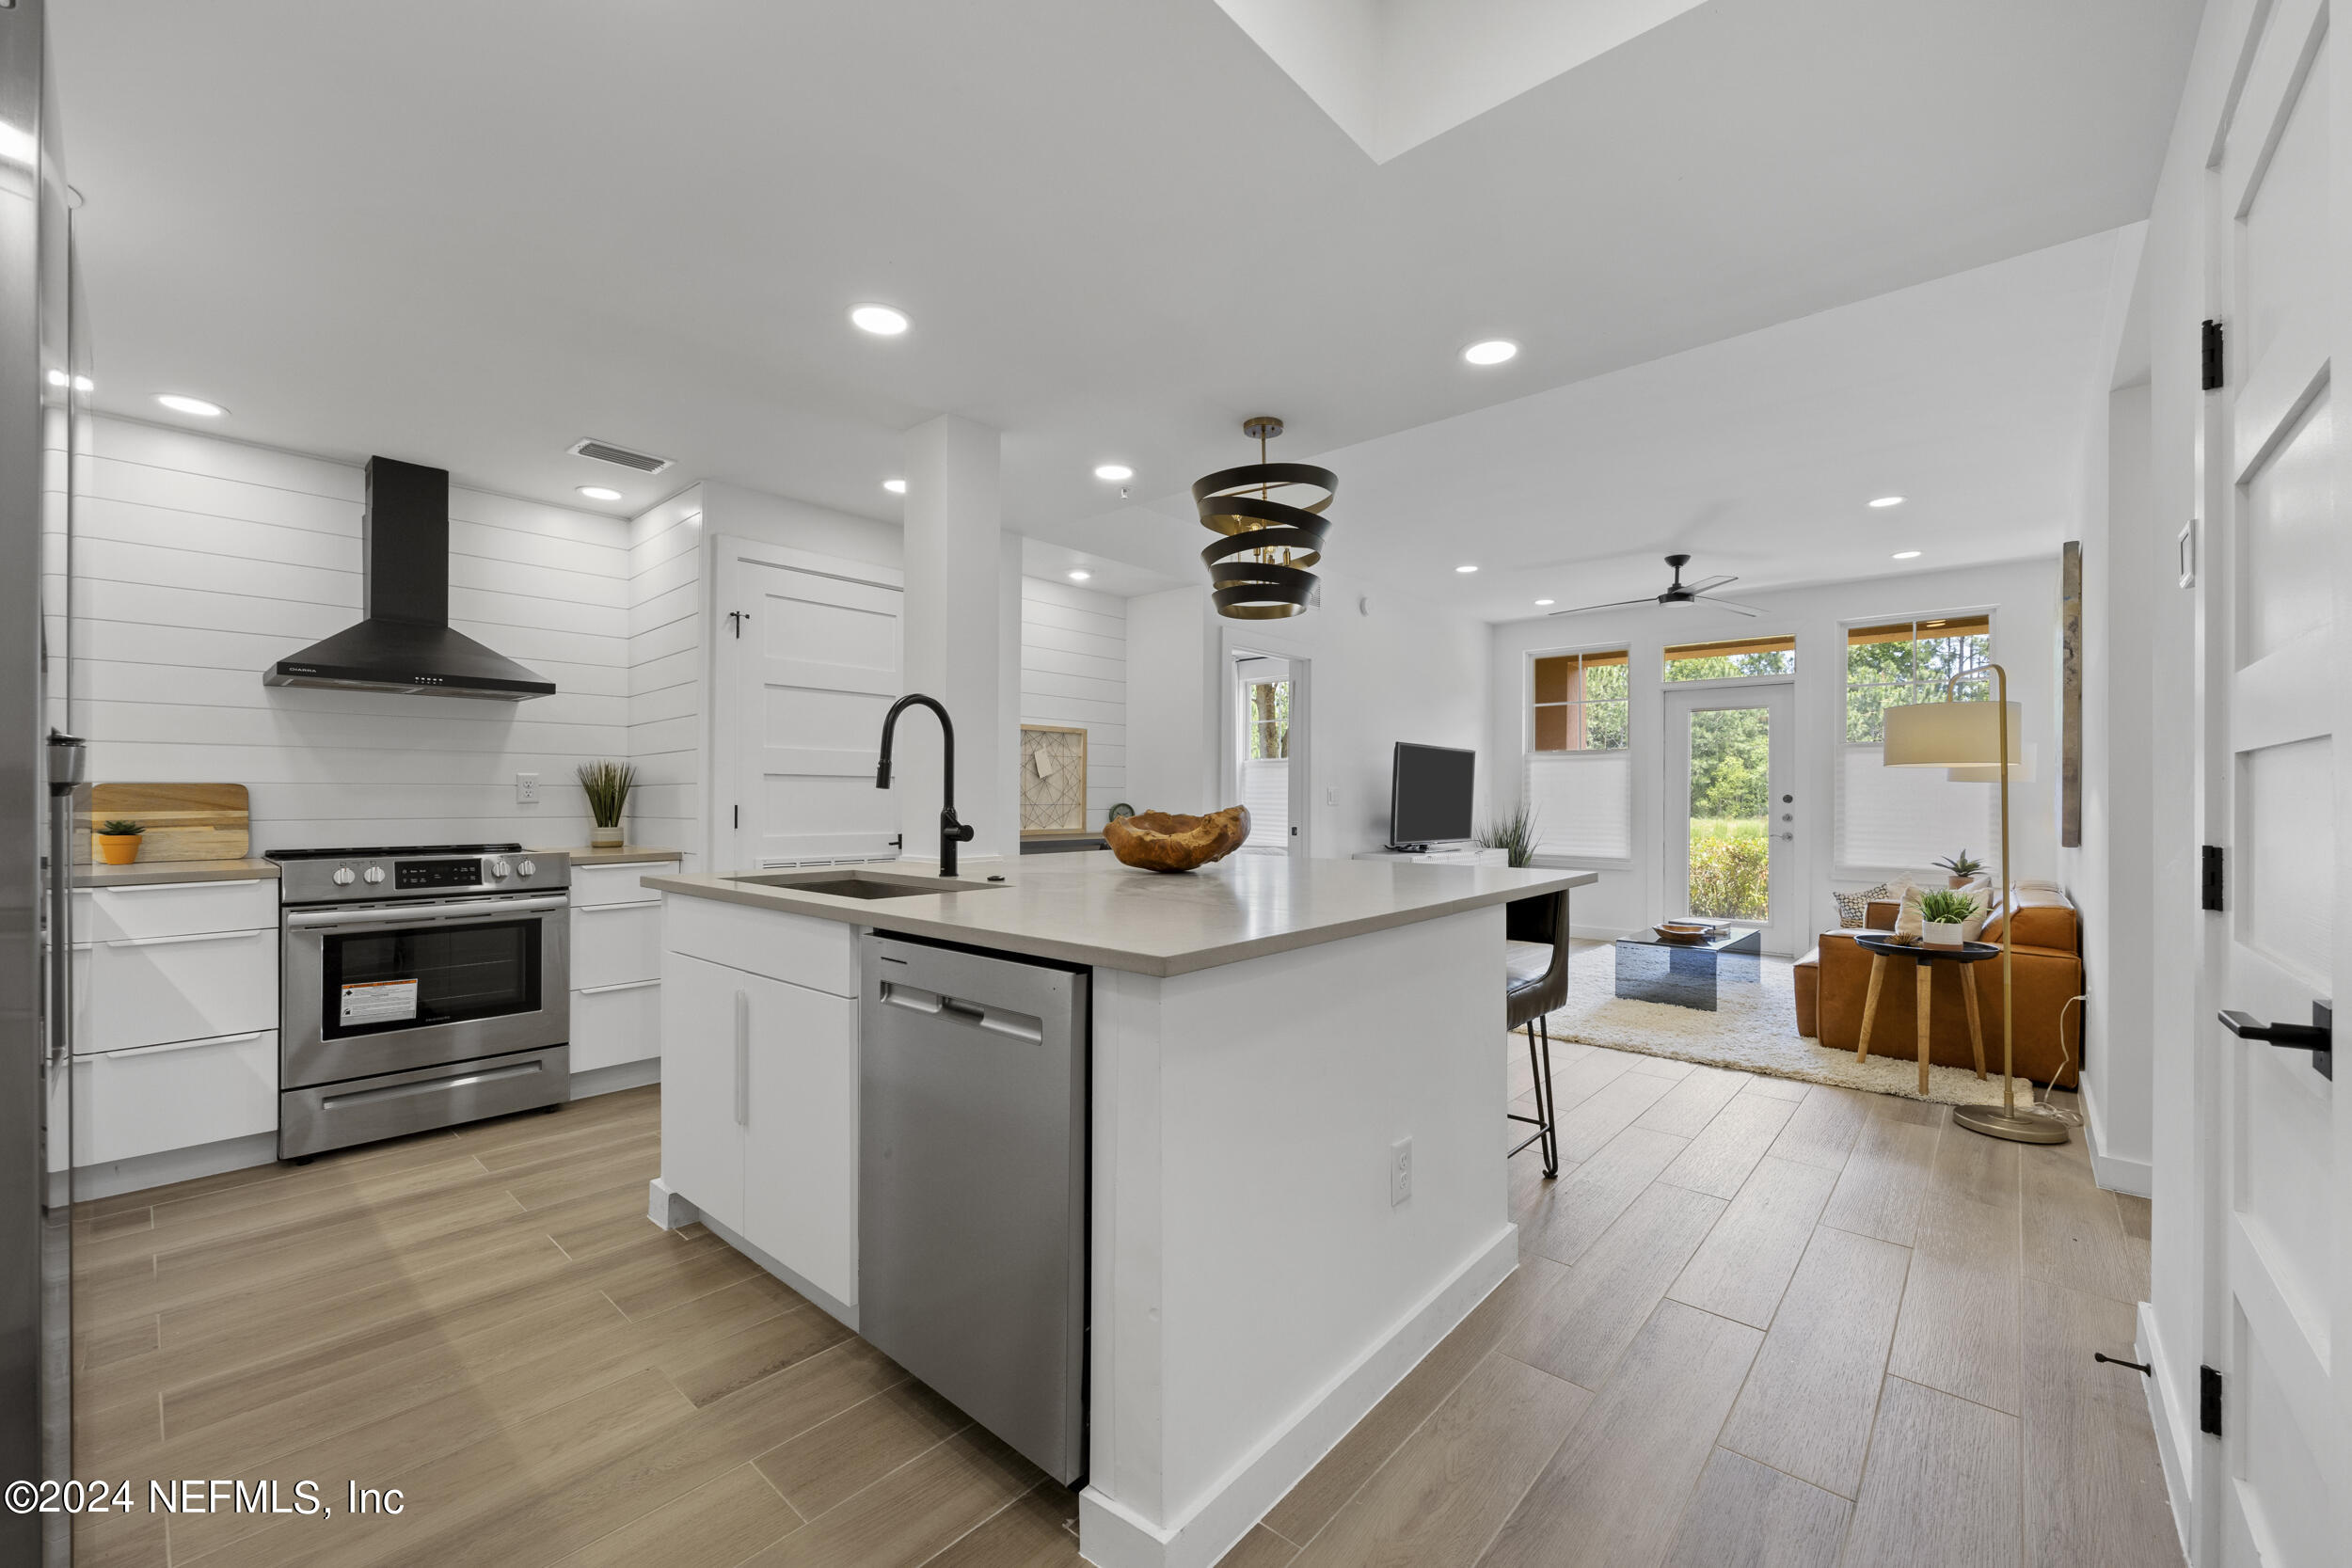 a large kitchen with stainless steel appliances a lot of counter space and a wooden floors